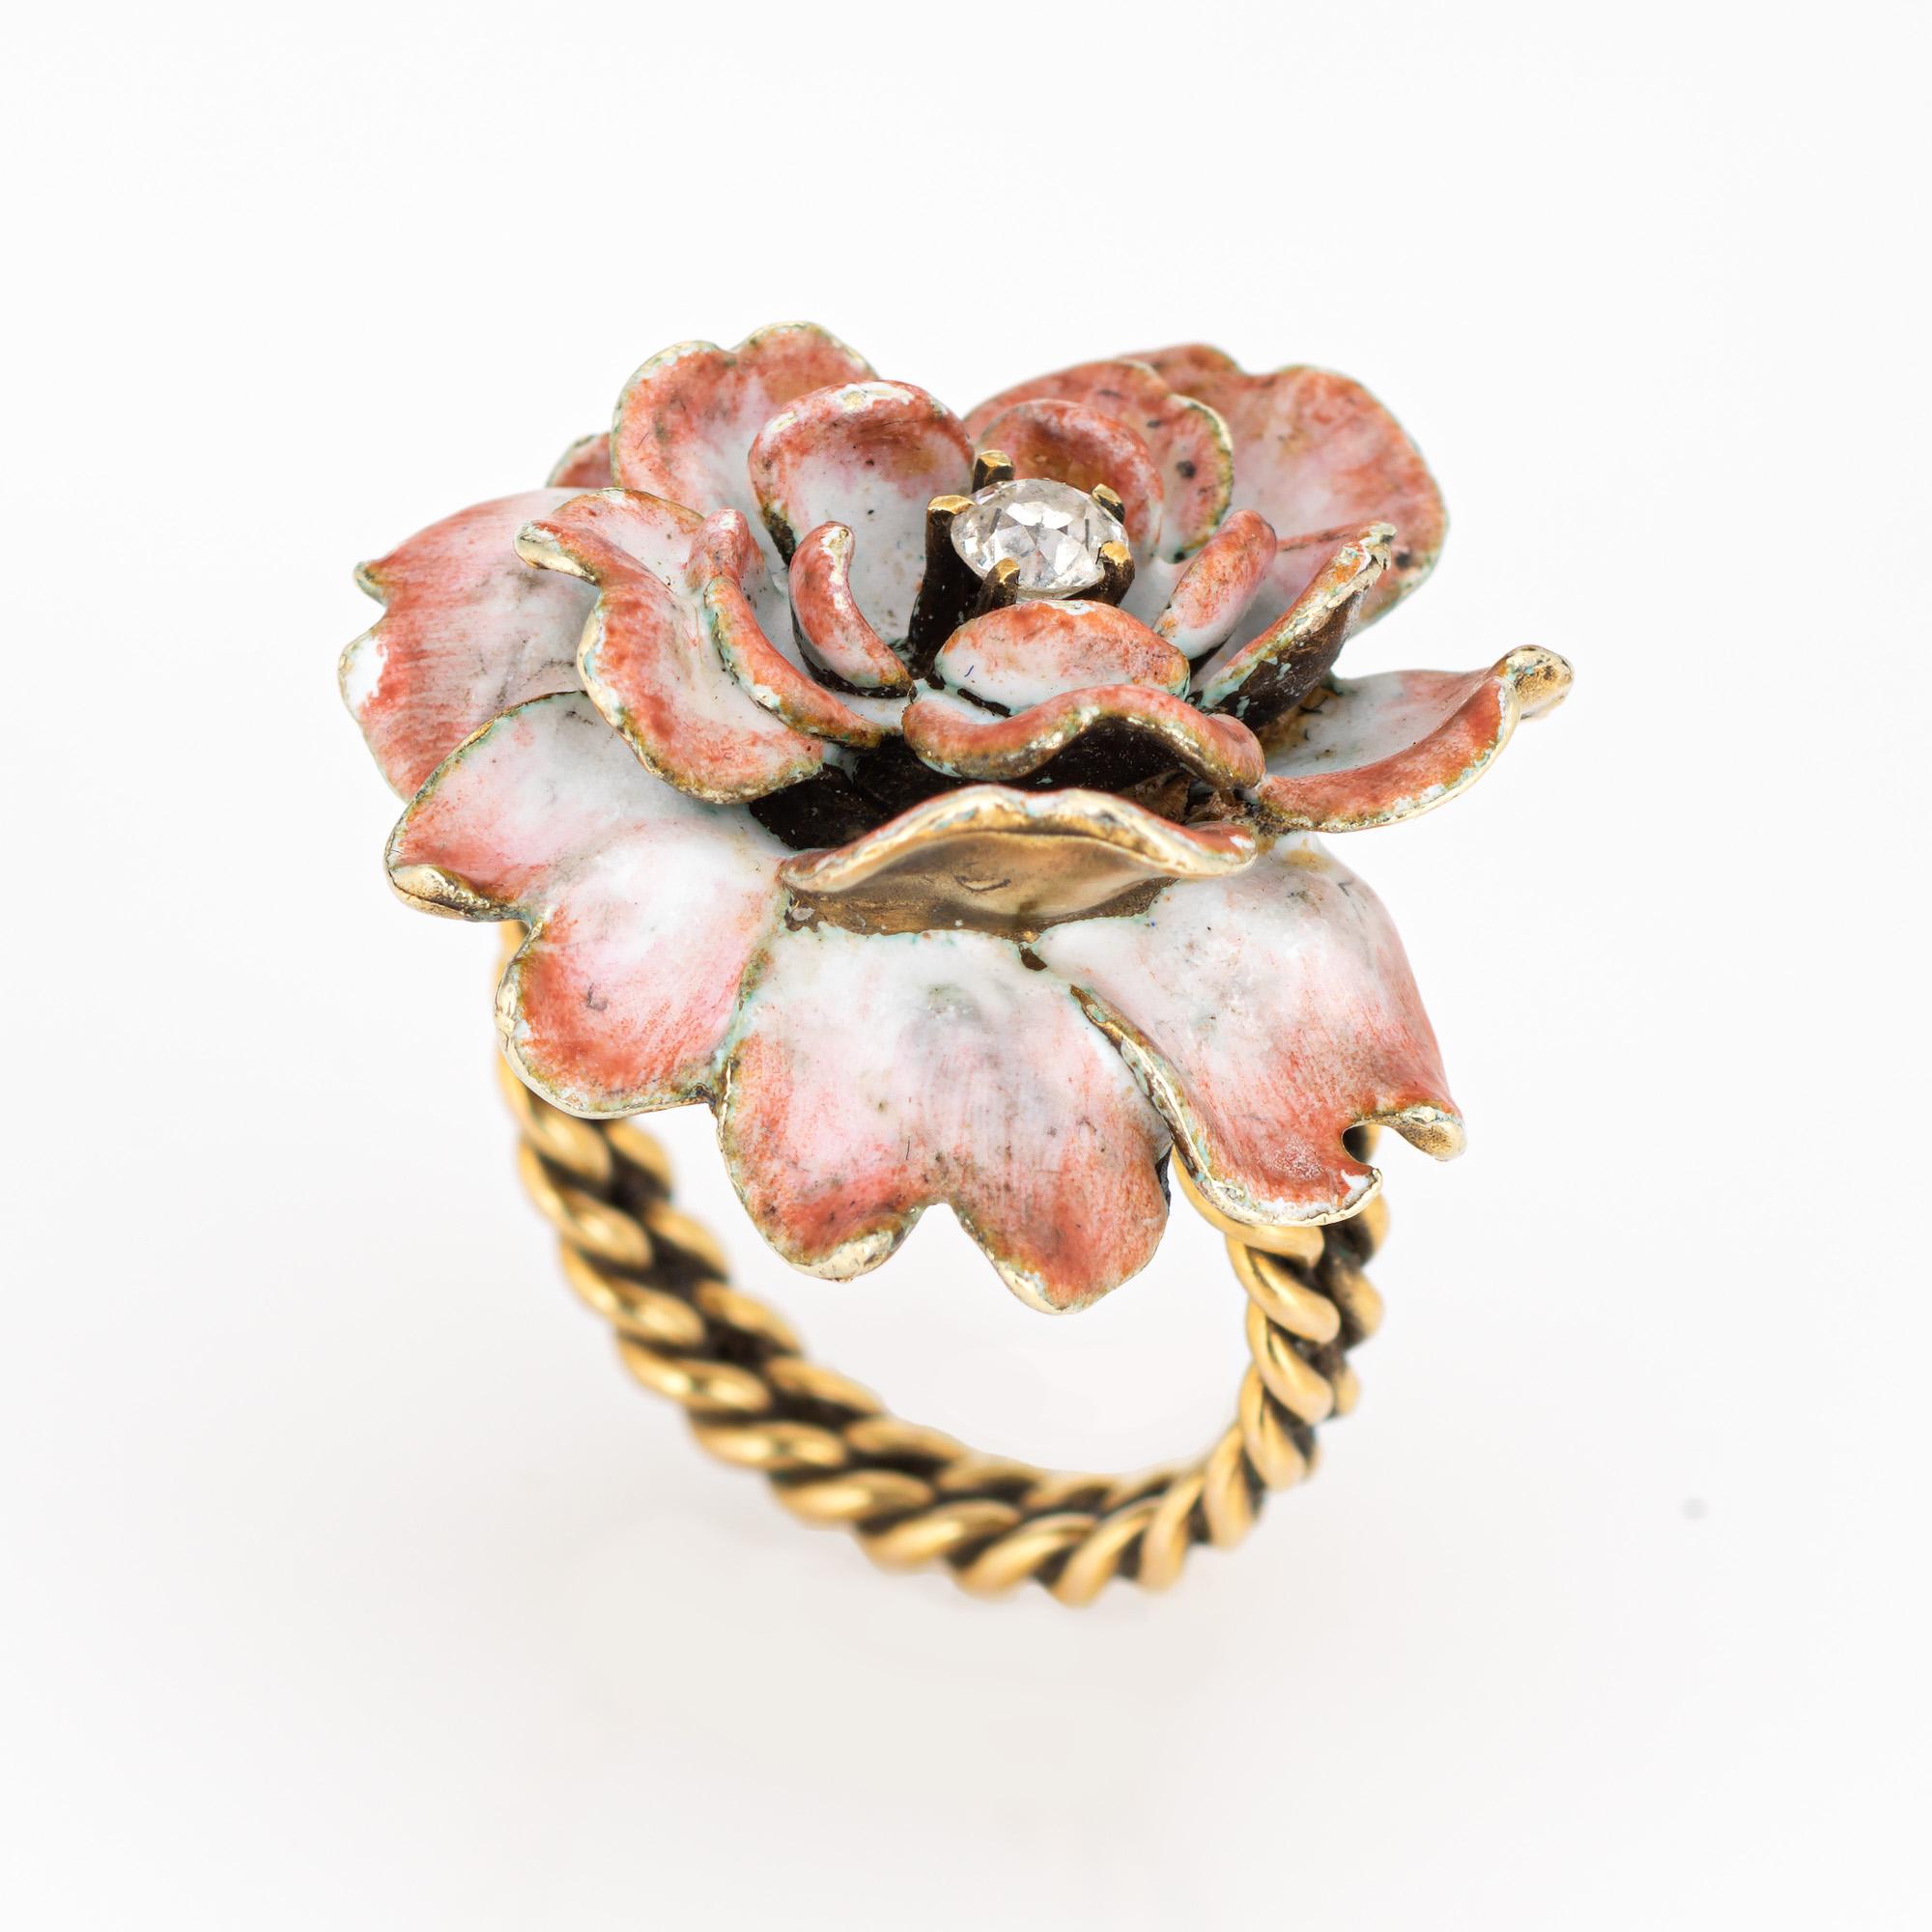 Stylish vintage enamel & diamond flower cocktail ring (circa 1950s to 1960s) crafted in 14 karat yellow gold. 

Old mine cut diamond is estimated at 0.10 carats (estimated at I-J color and SI2 clarity). The enamel is in good condition with some loss